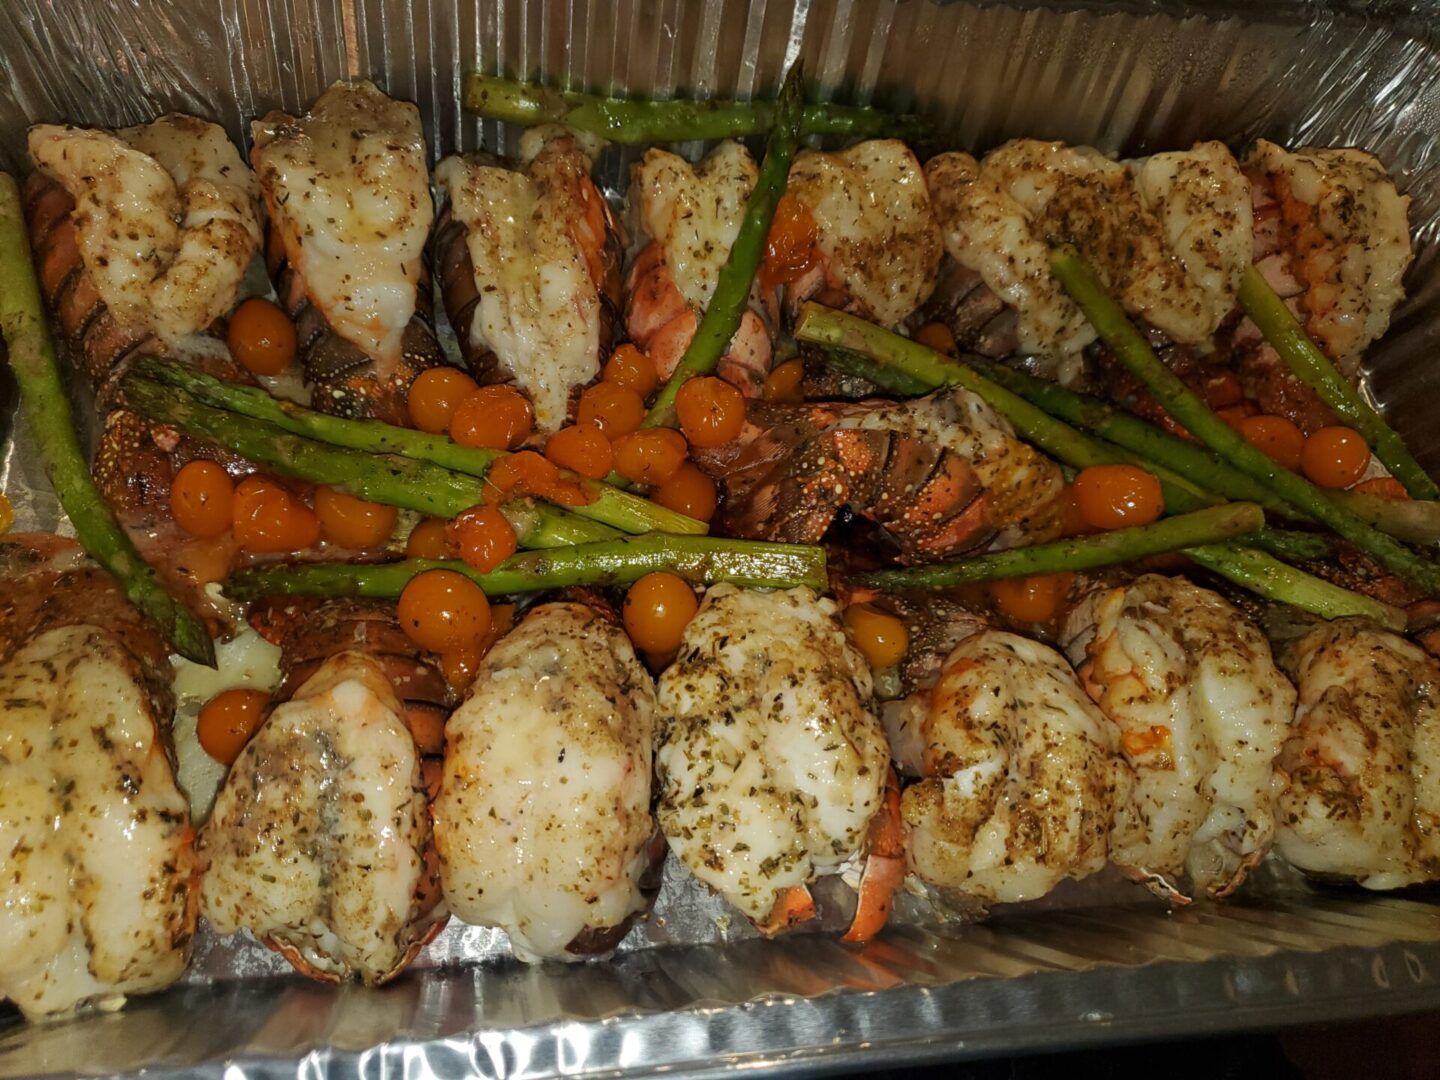 A tray of chicken and vegetables in foil.